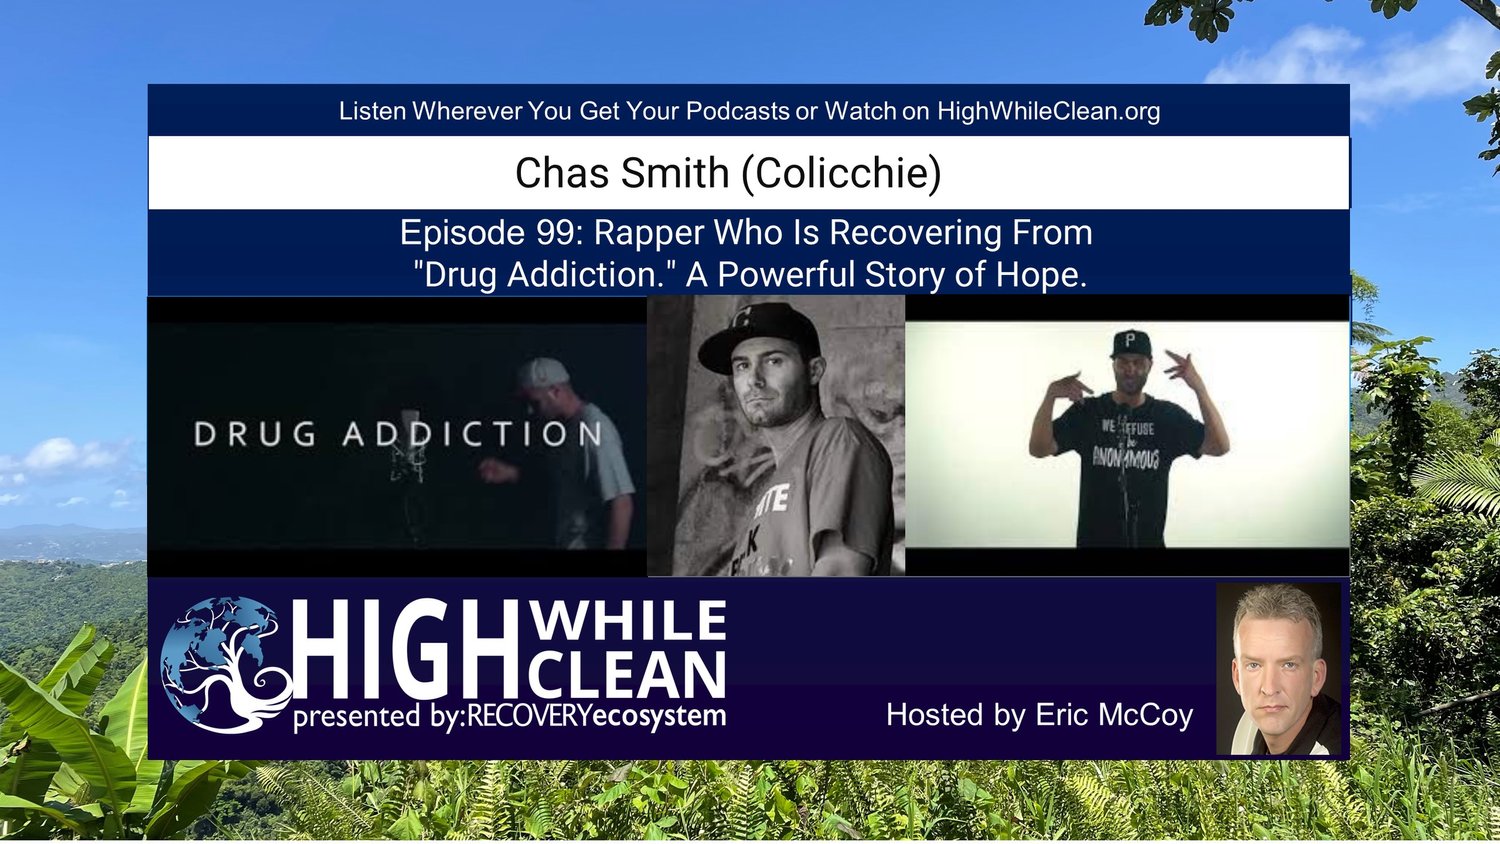 Episode 099: Chas Smith (Colicchie): Rapper, Who's song "Drug Addiction," Is a Powerful Message of Hope.